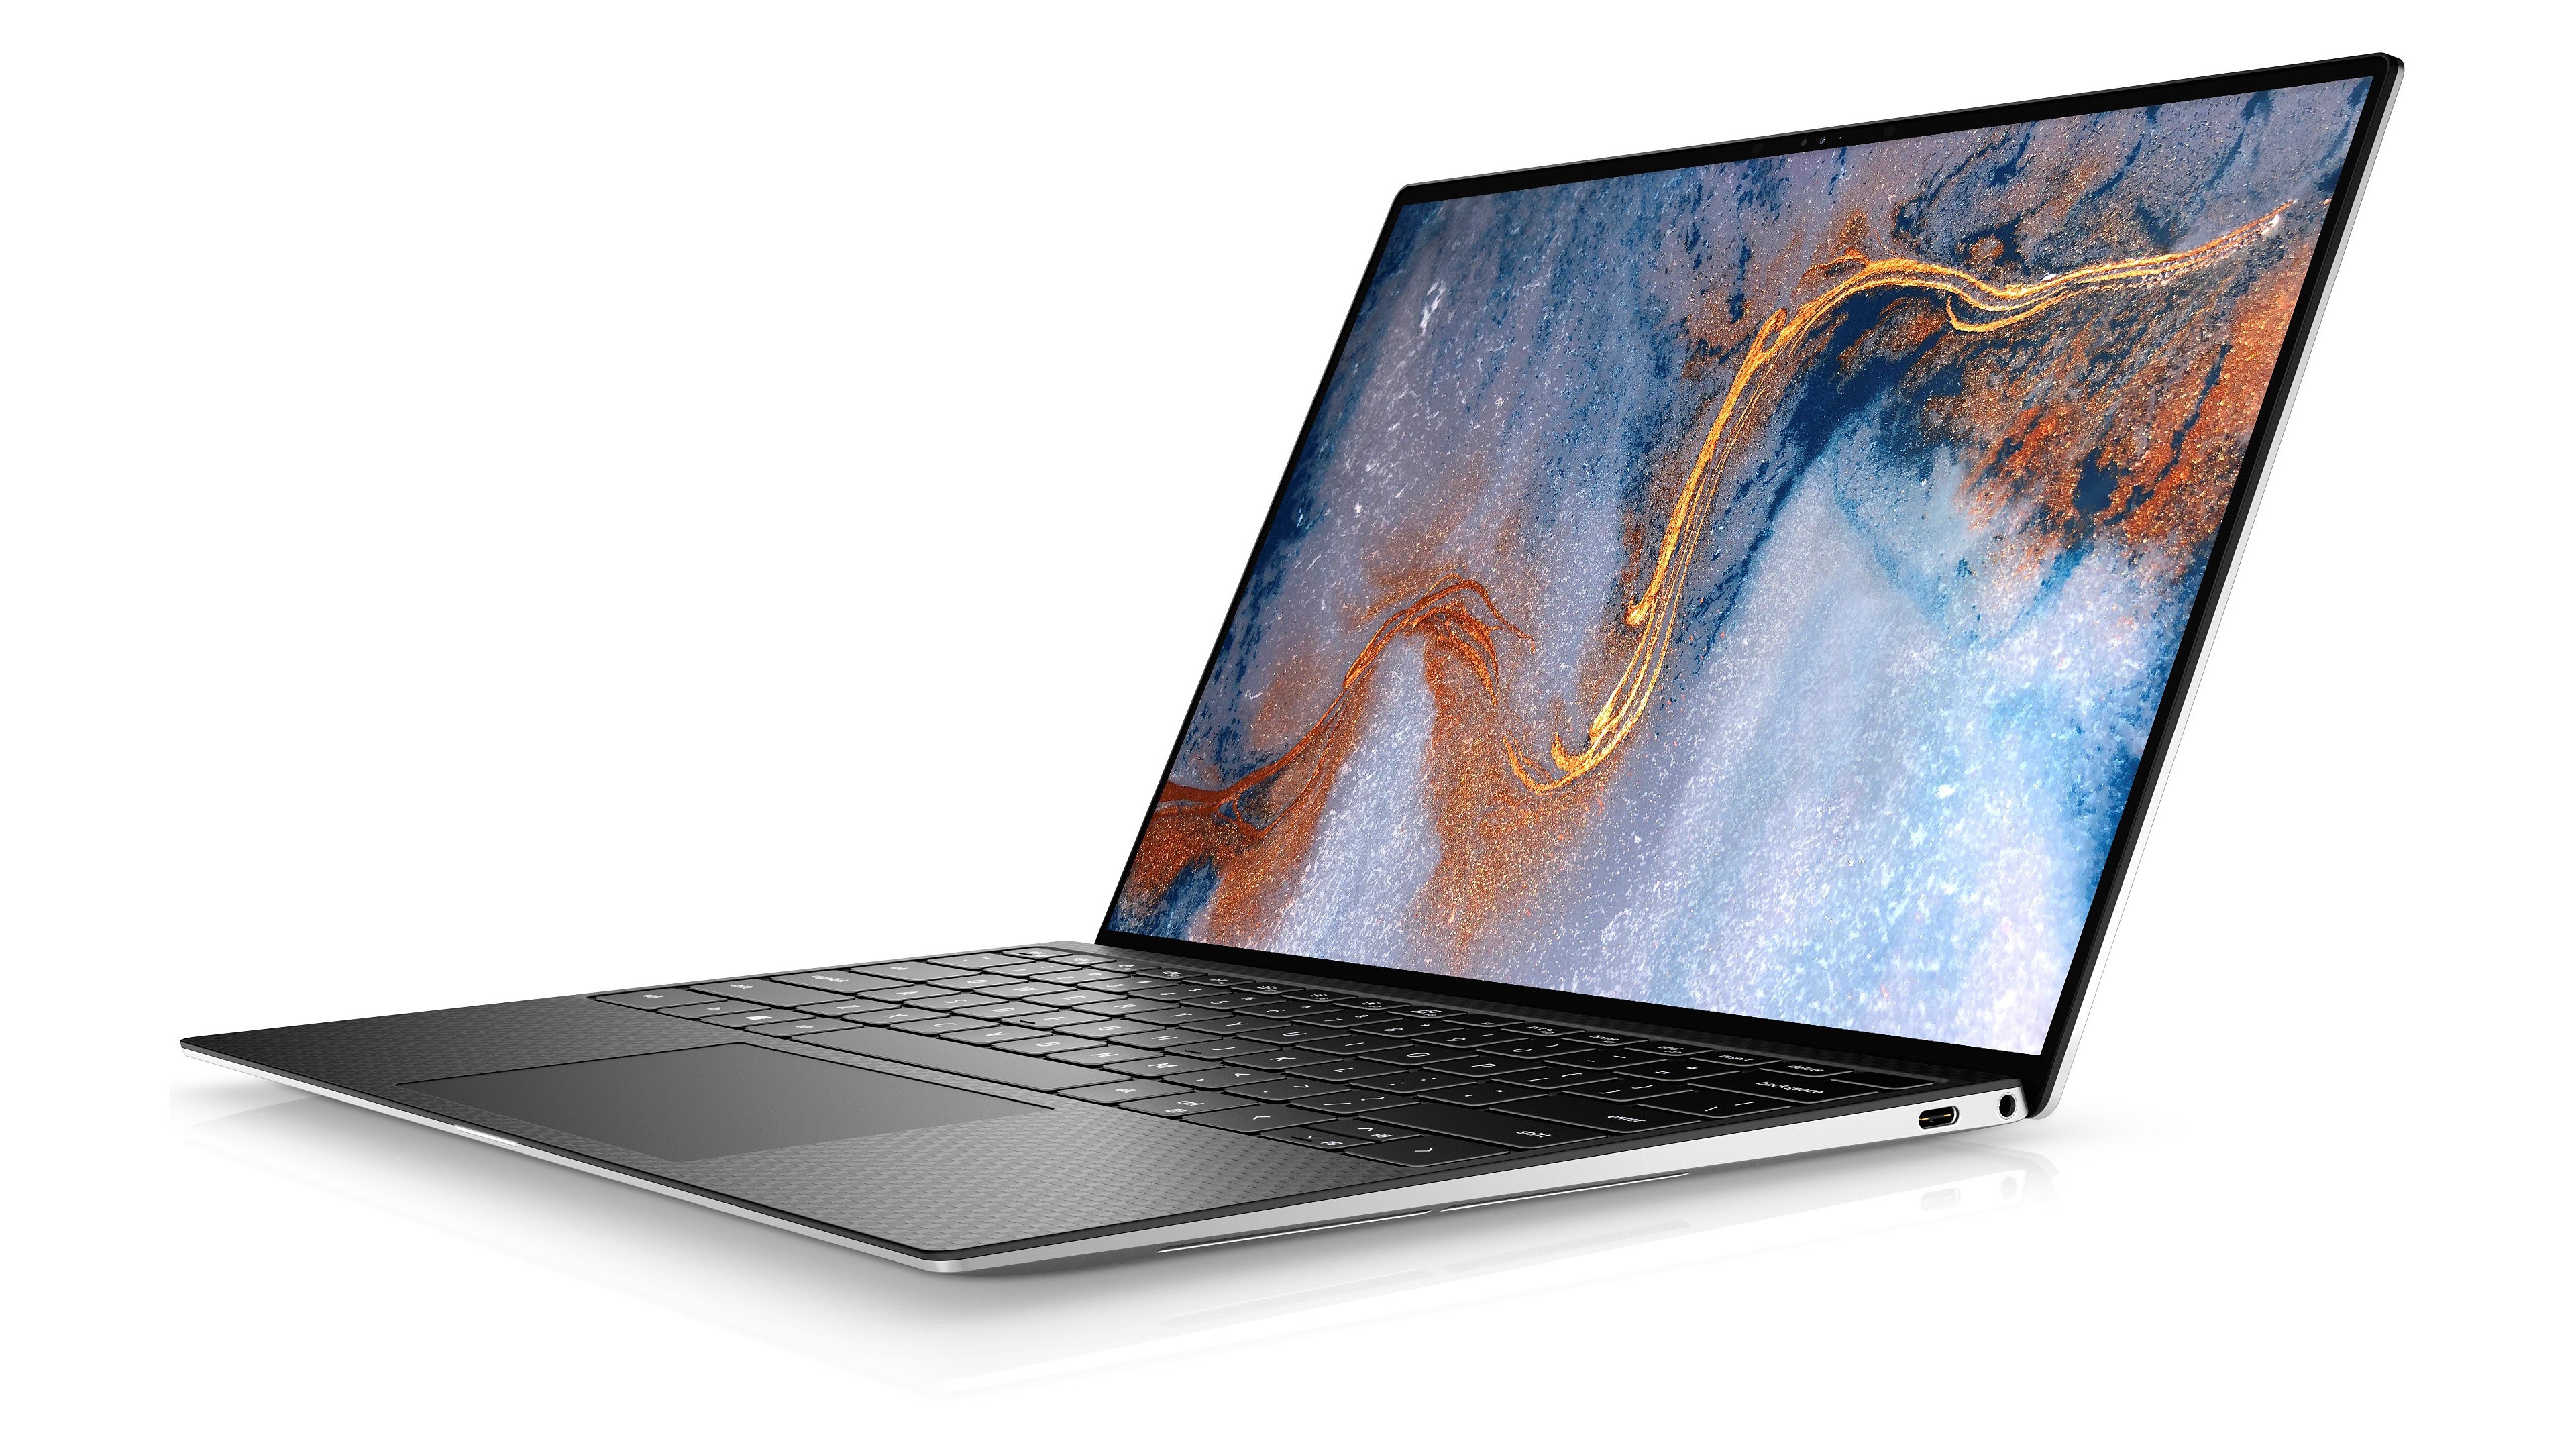 Dell XPS 13 review: Excellent laptop but not for everyone